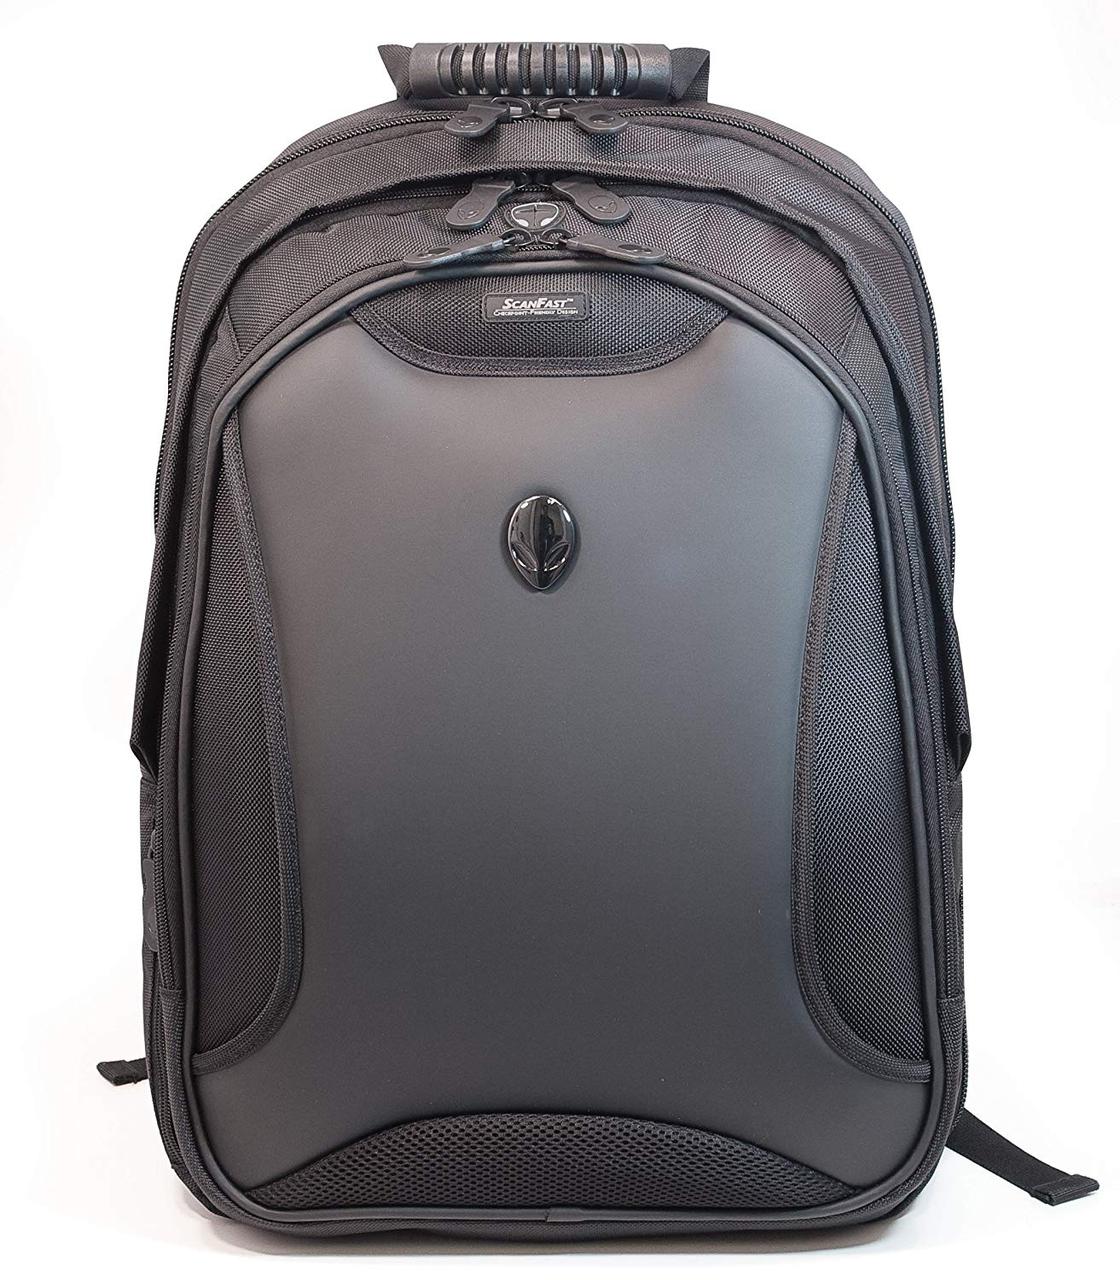 Рюкзак Mobile Edge Alienware Orion M17x ScanFast Checkpoint Friendly Backpack 17”